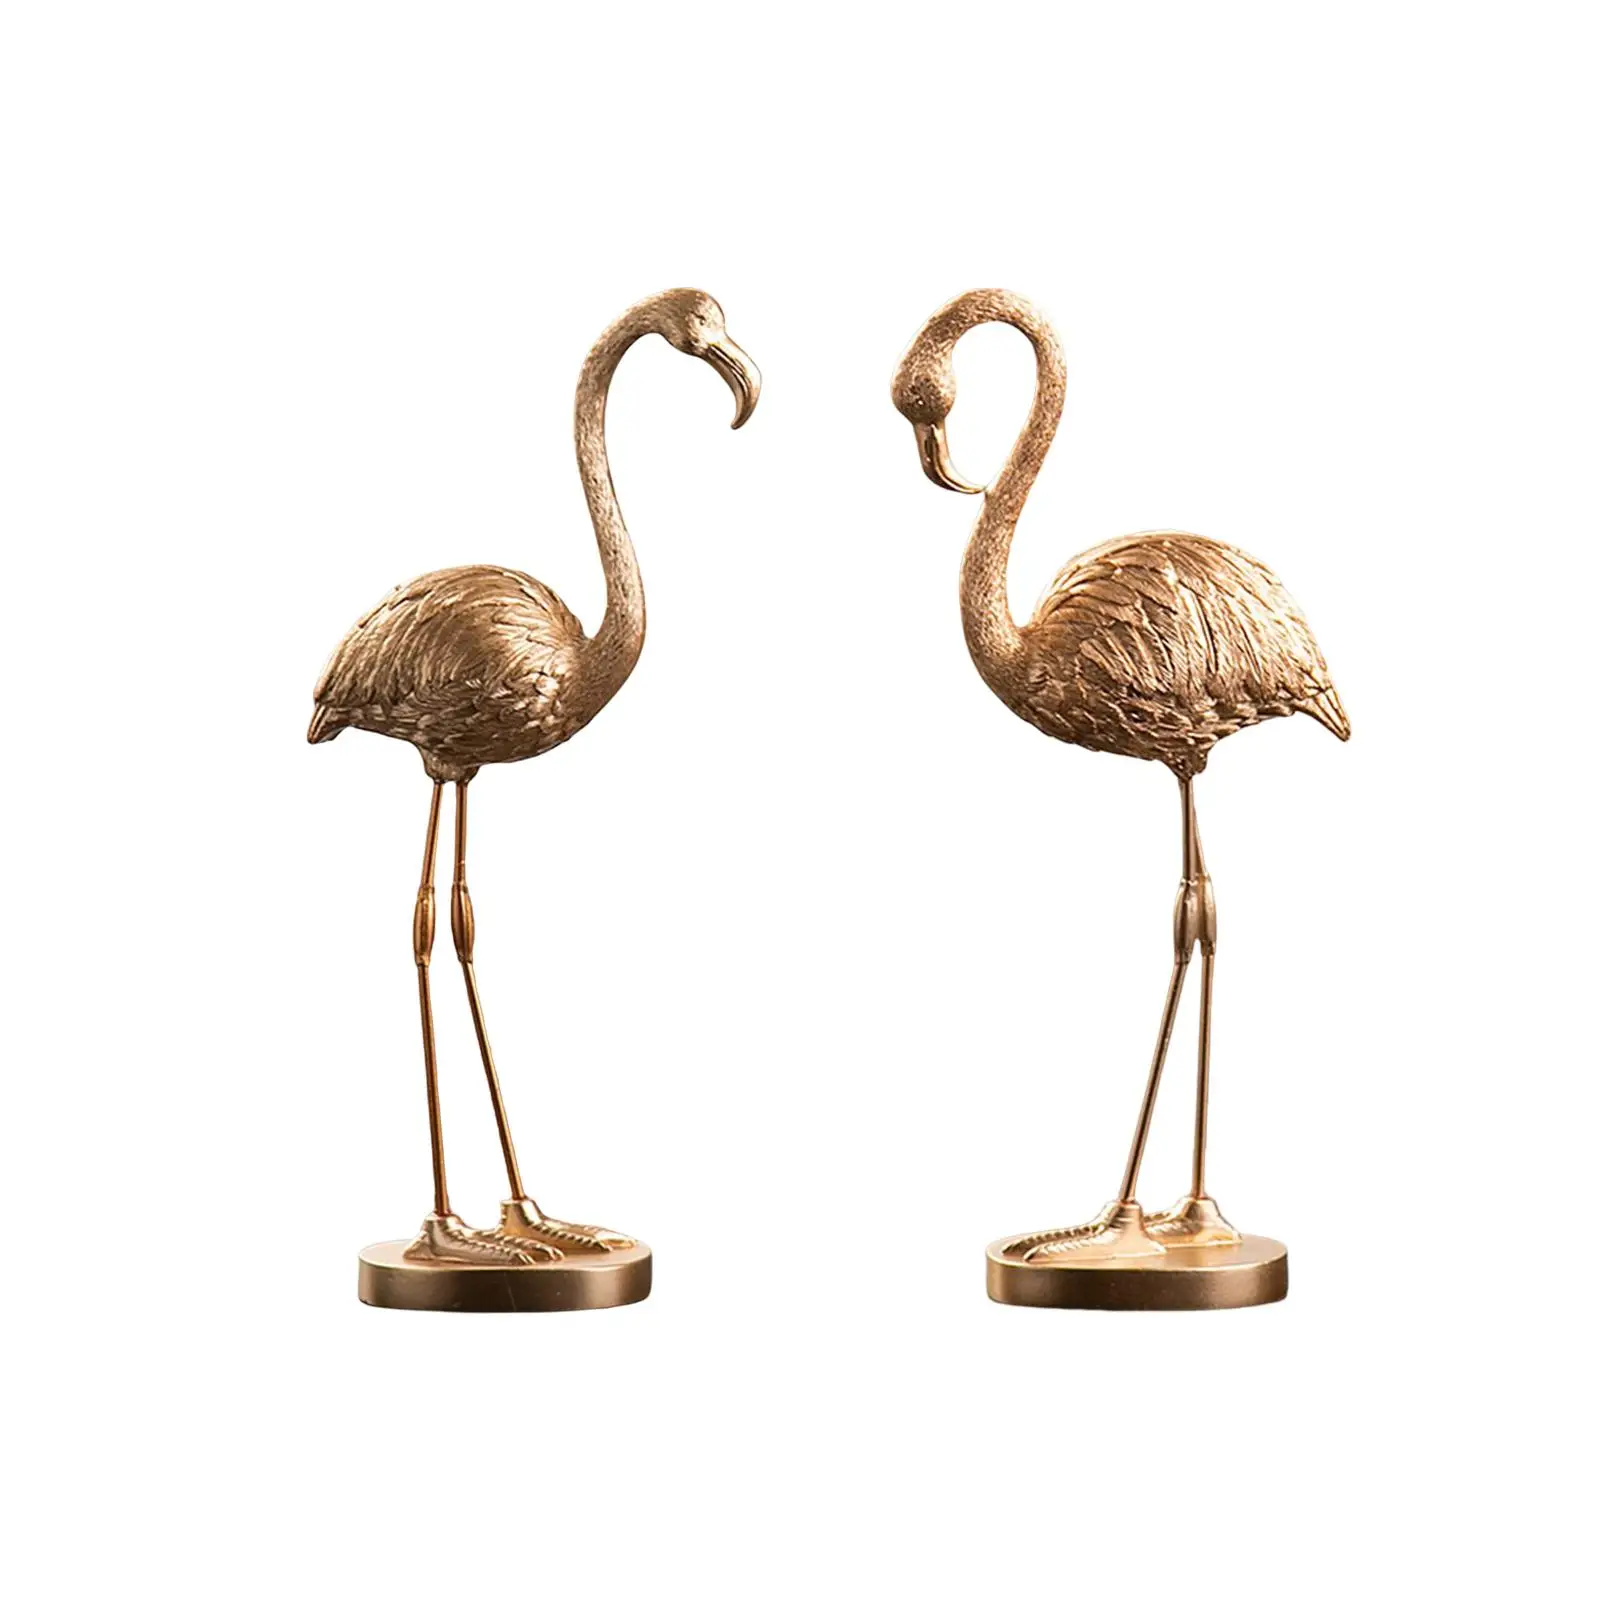 Flamingo Statue Collectible Tabletop Decoration Figurine for Home Yard Decor